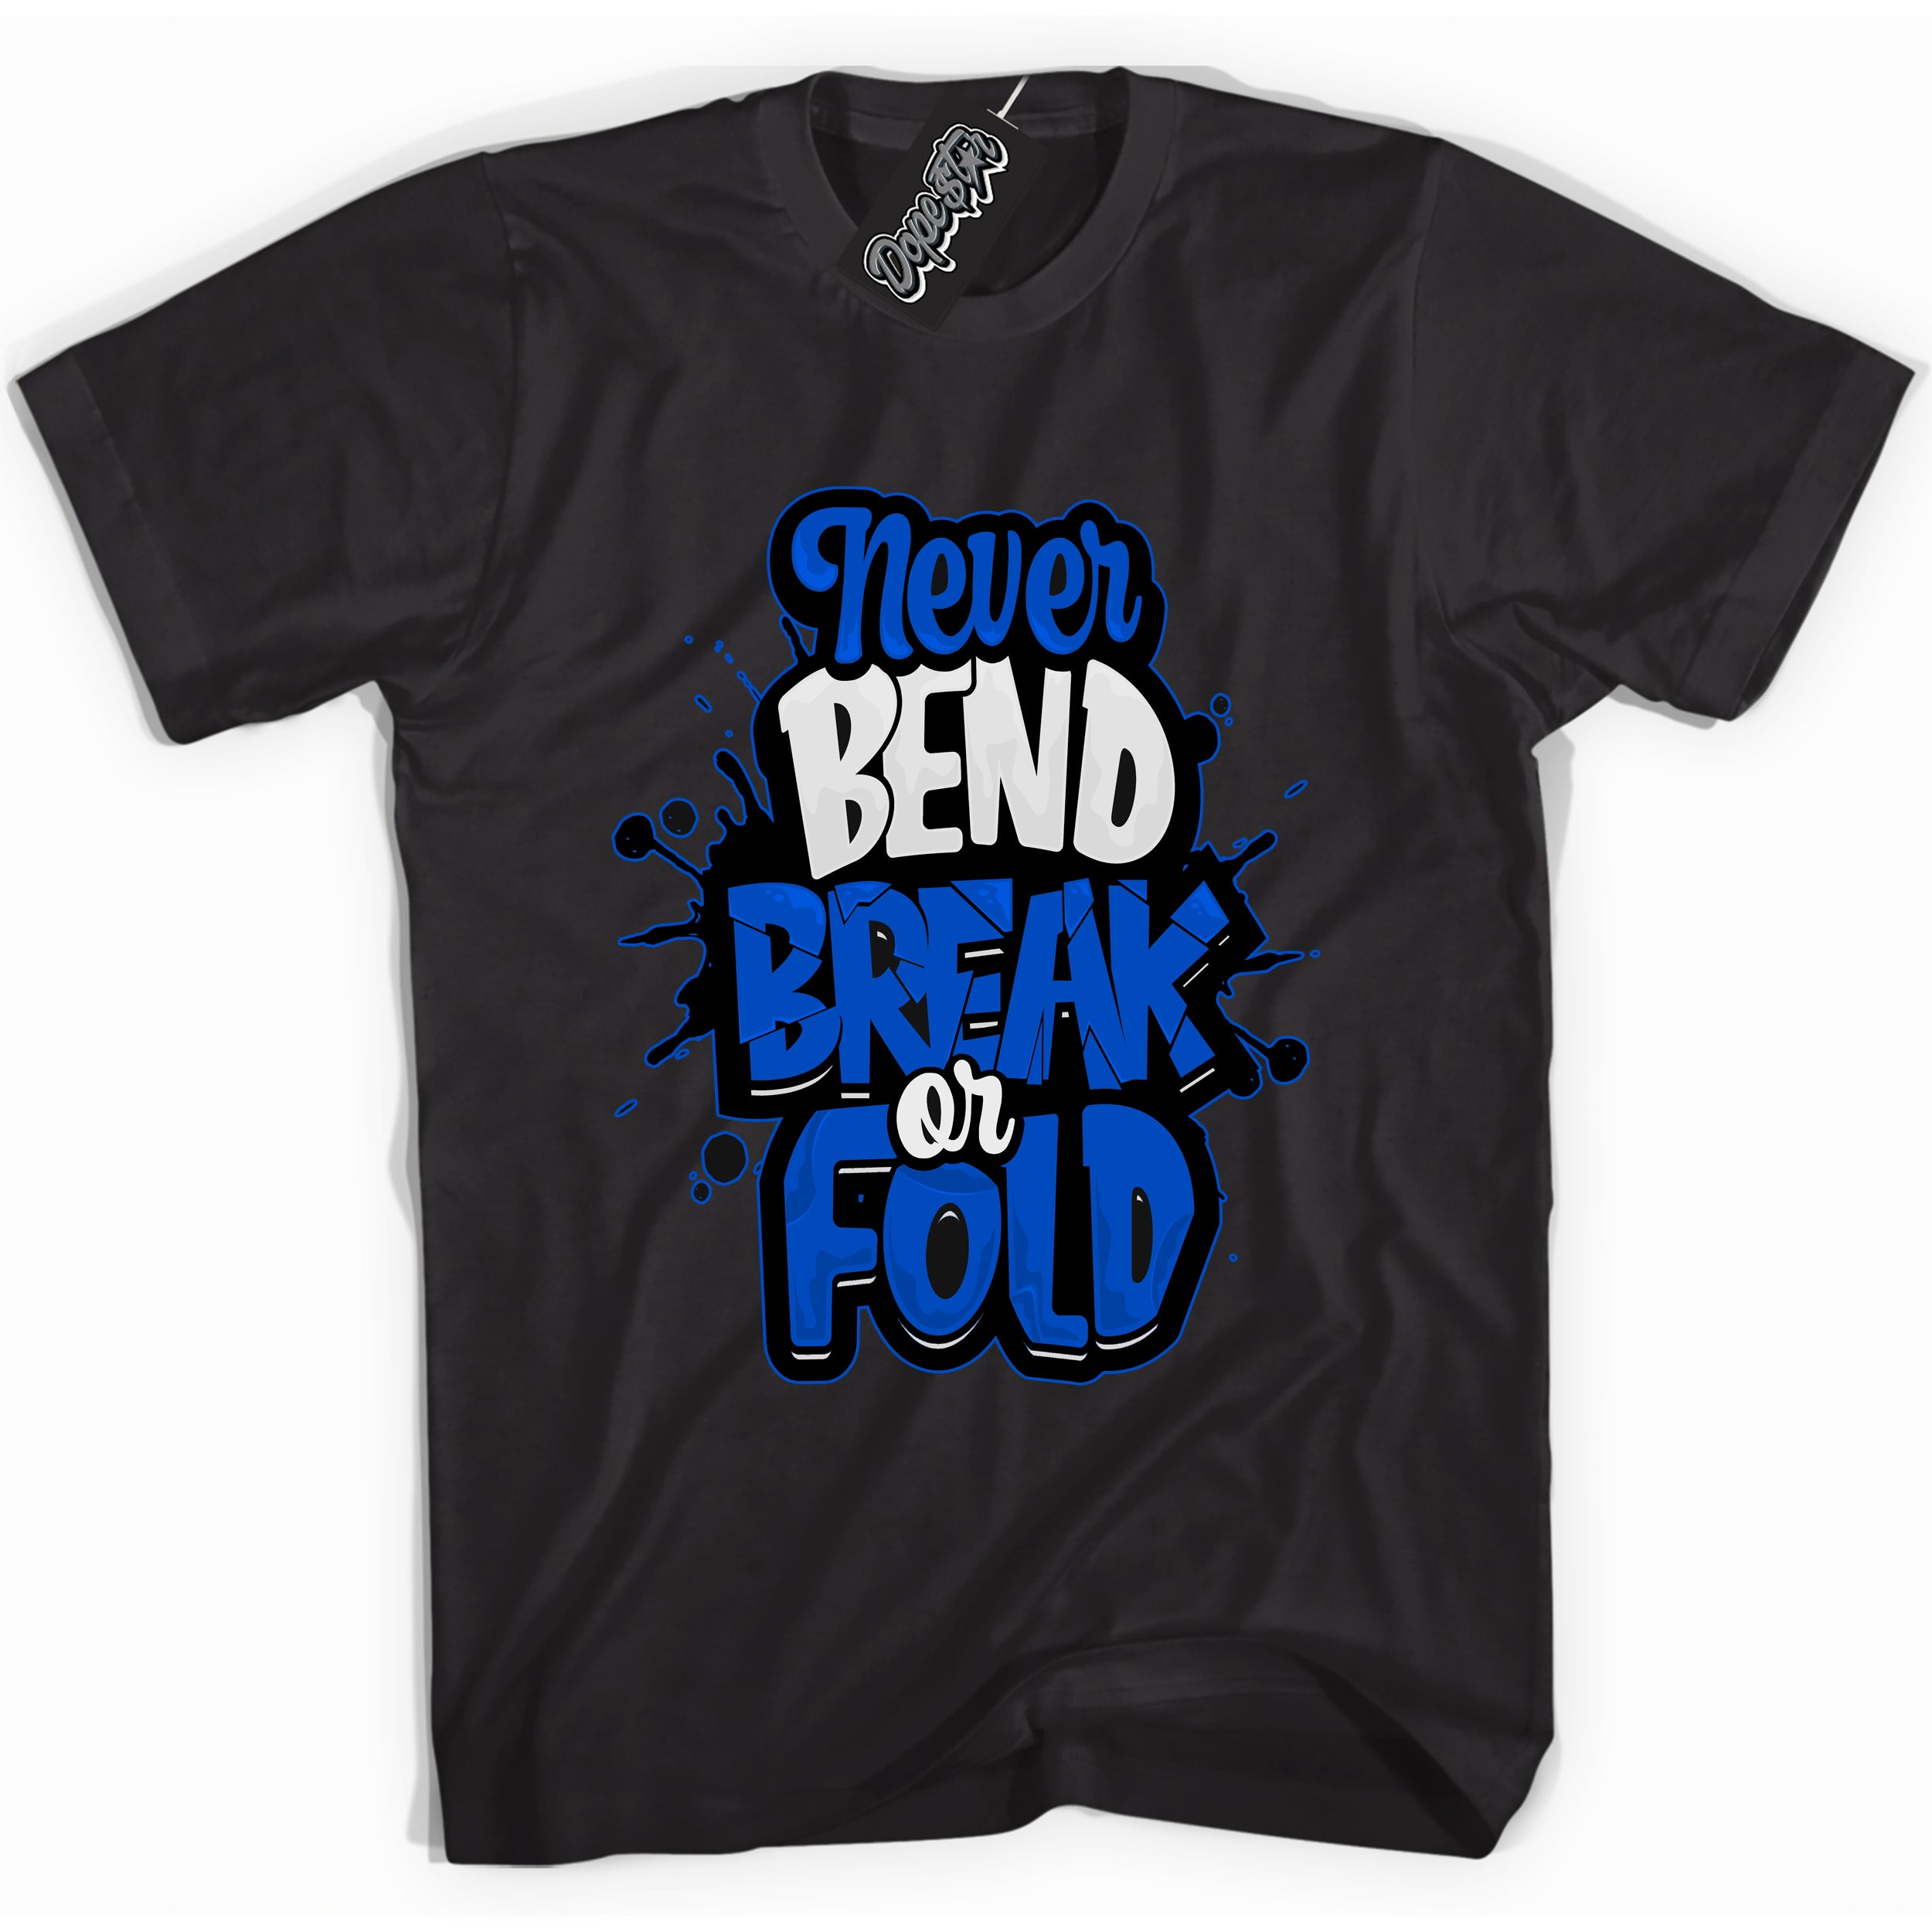 Cool Black graphic tee with "Never Bend Break Or Fold" design, that perfectly matches Royal Reimagined 1s sneakers 